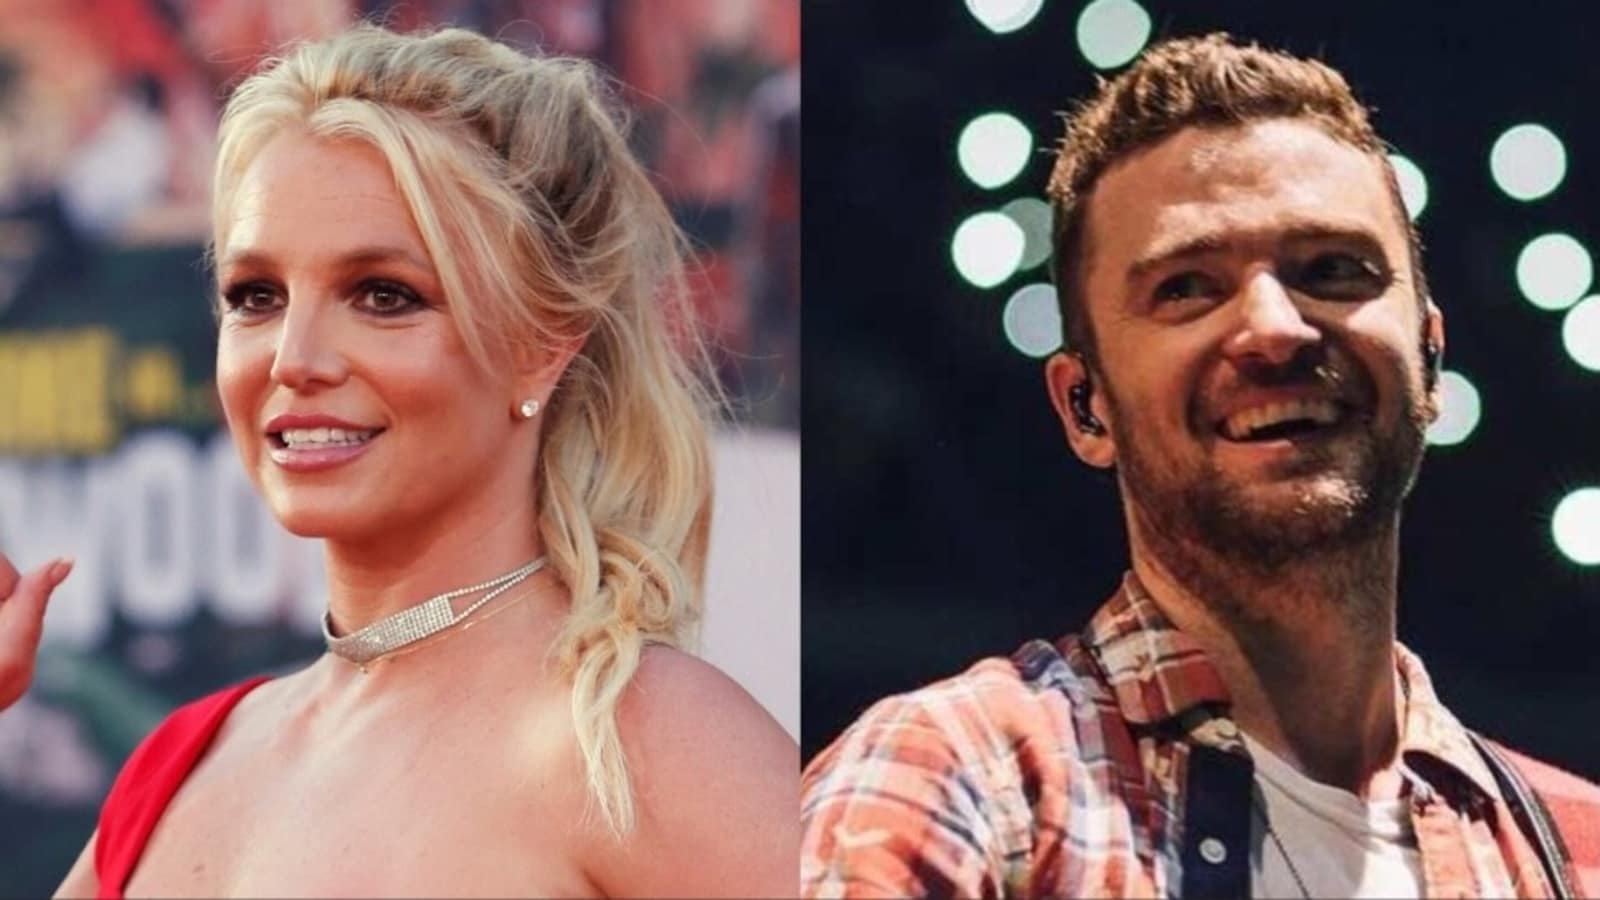 Justin Timberlake seemingly reacts to Britney Spears’ apology